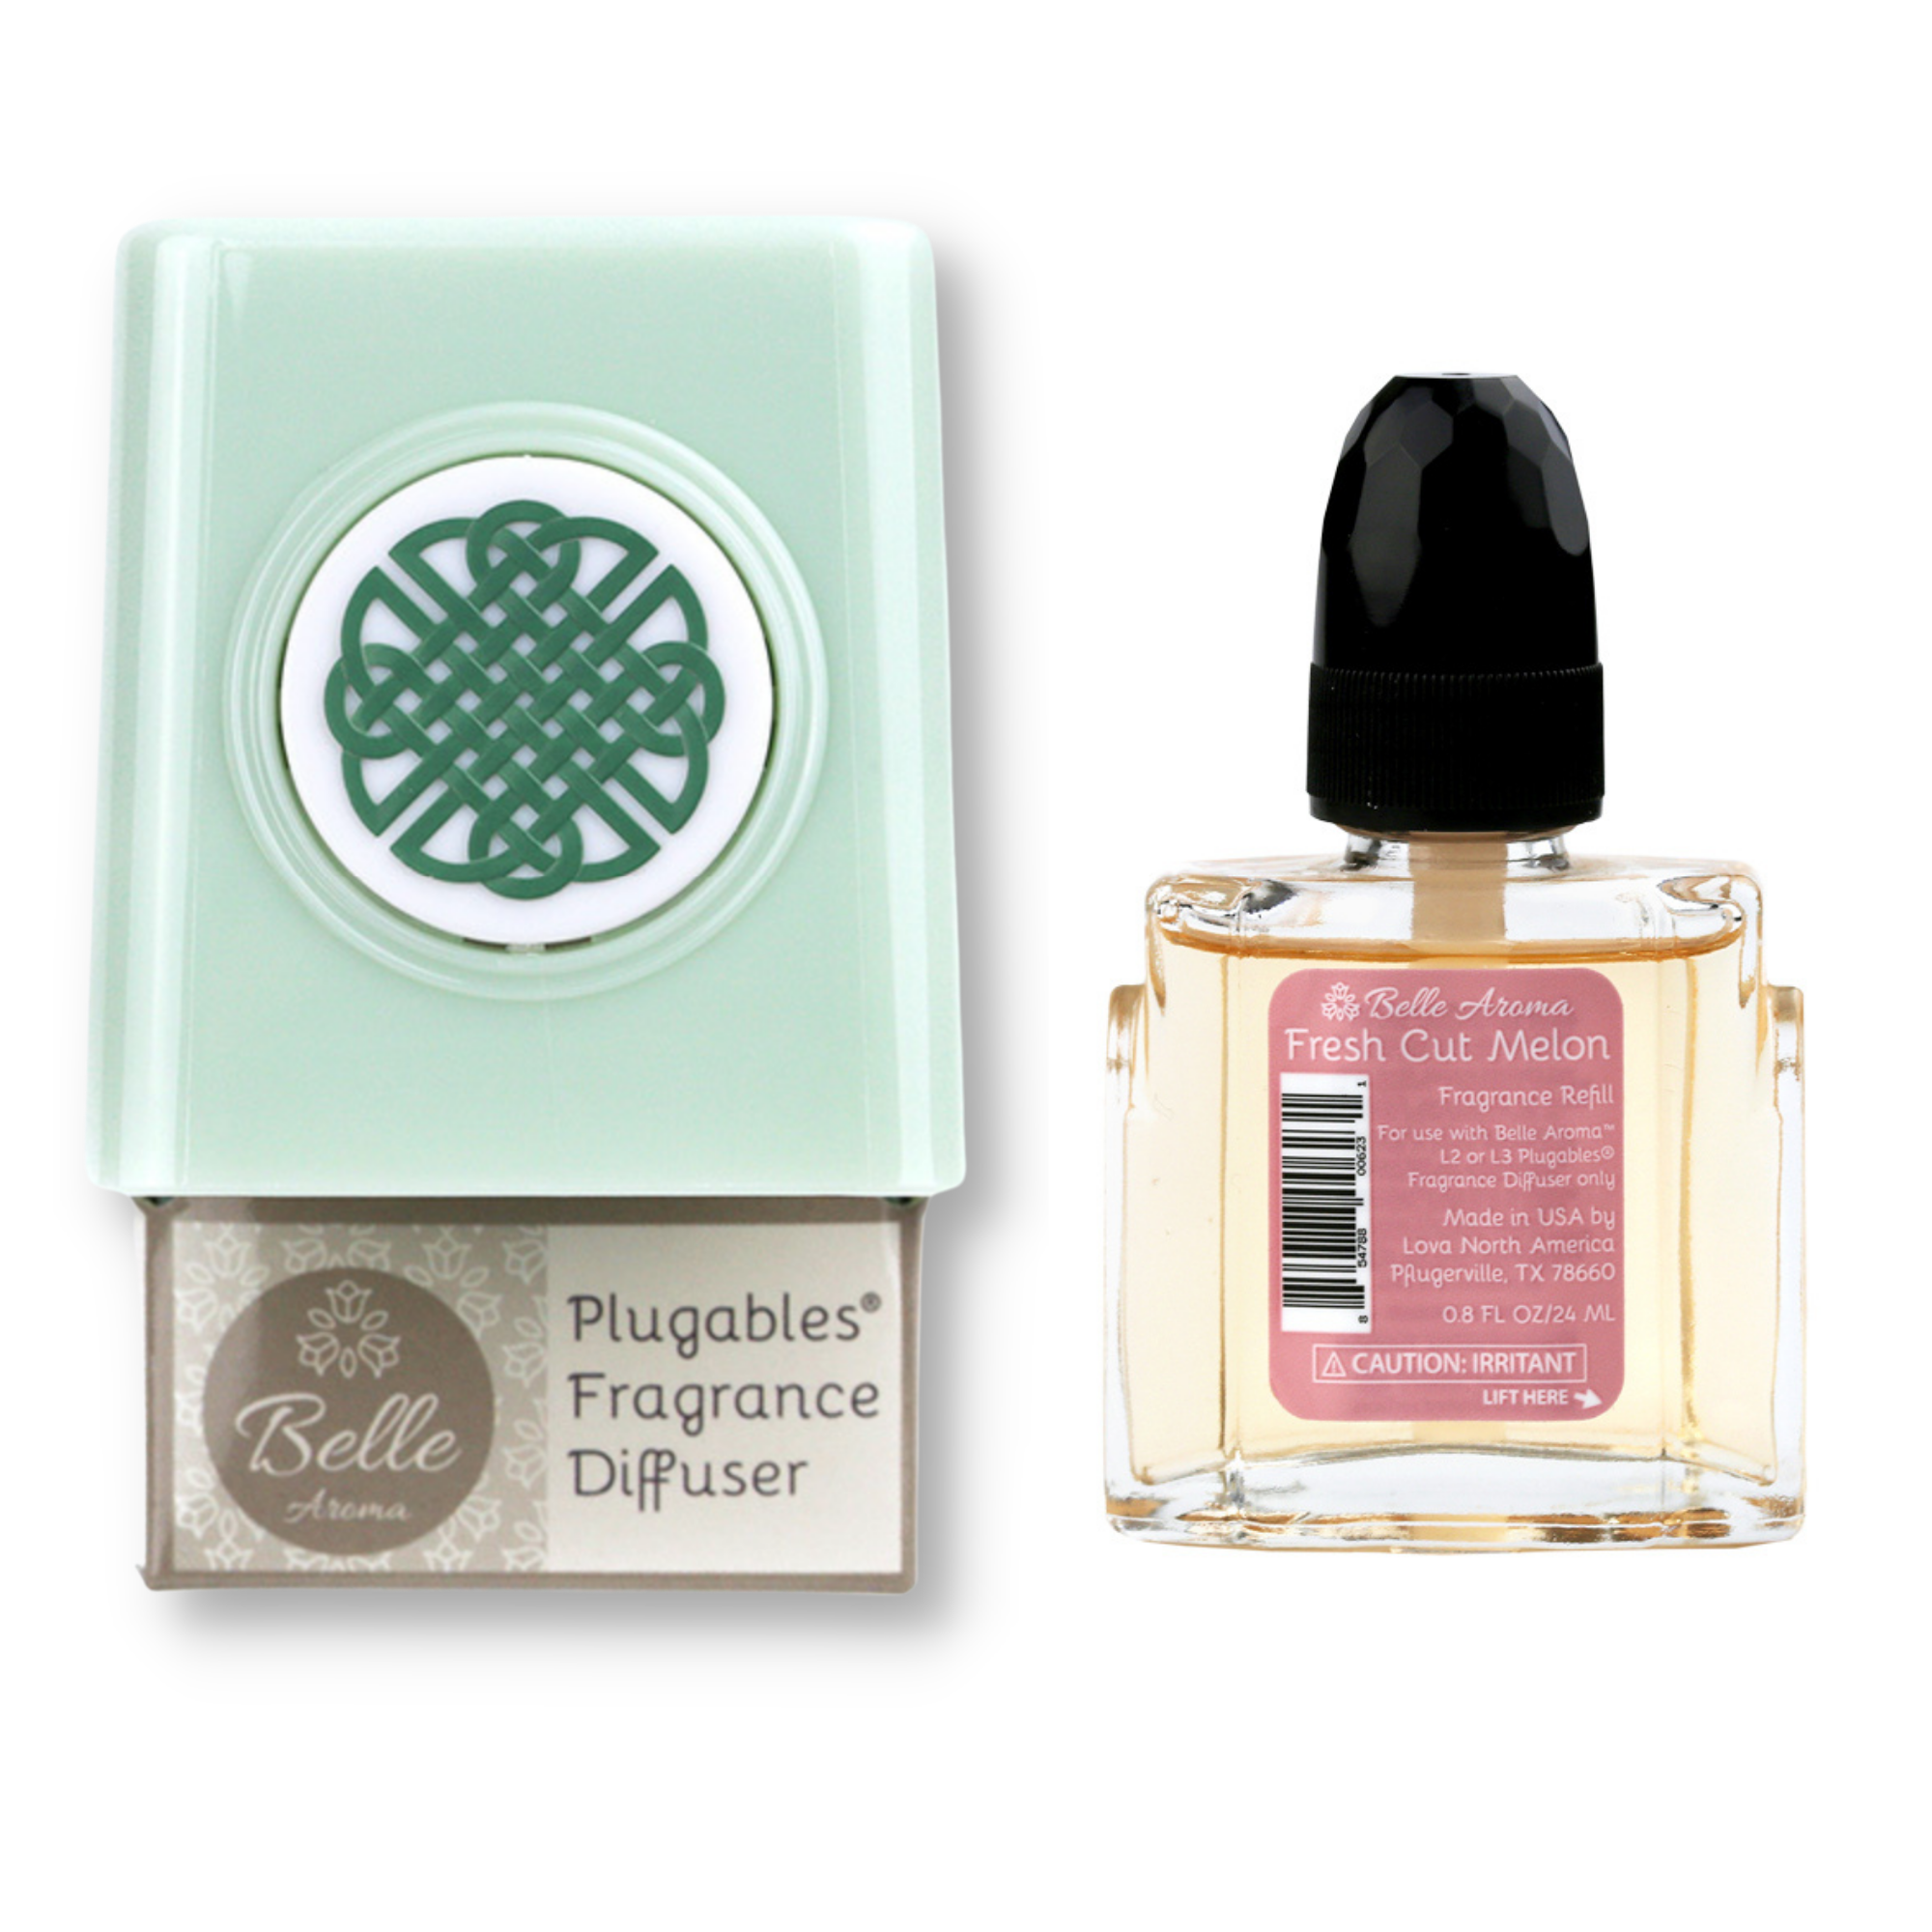 Celtic Knot Medallion Plugables® Plugin Aromalectric® Scented Oil Diffuser - Sea Glass with Fresh Cut Melon Fragrance Oil Home Fragrance Accessories